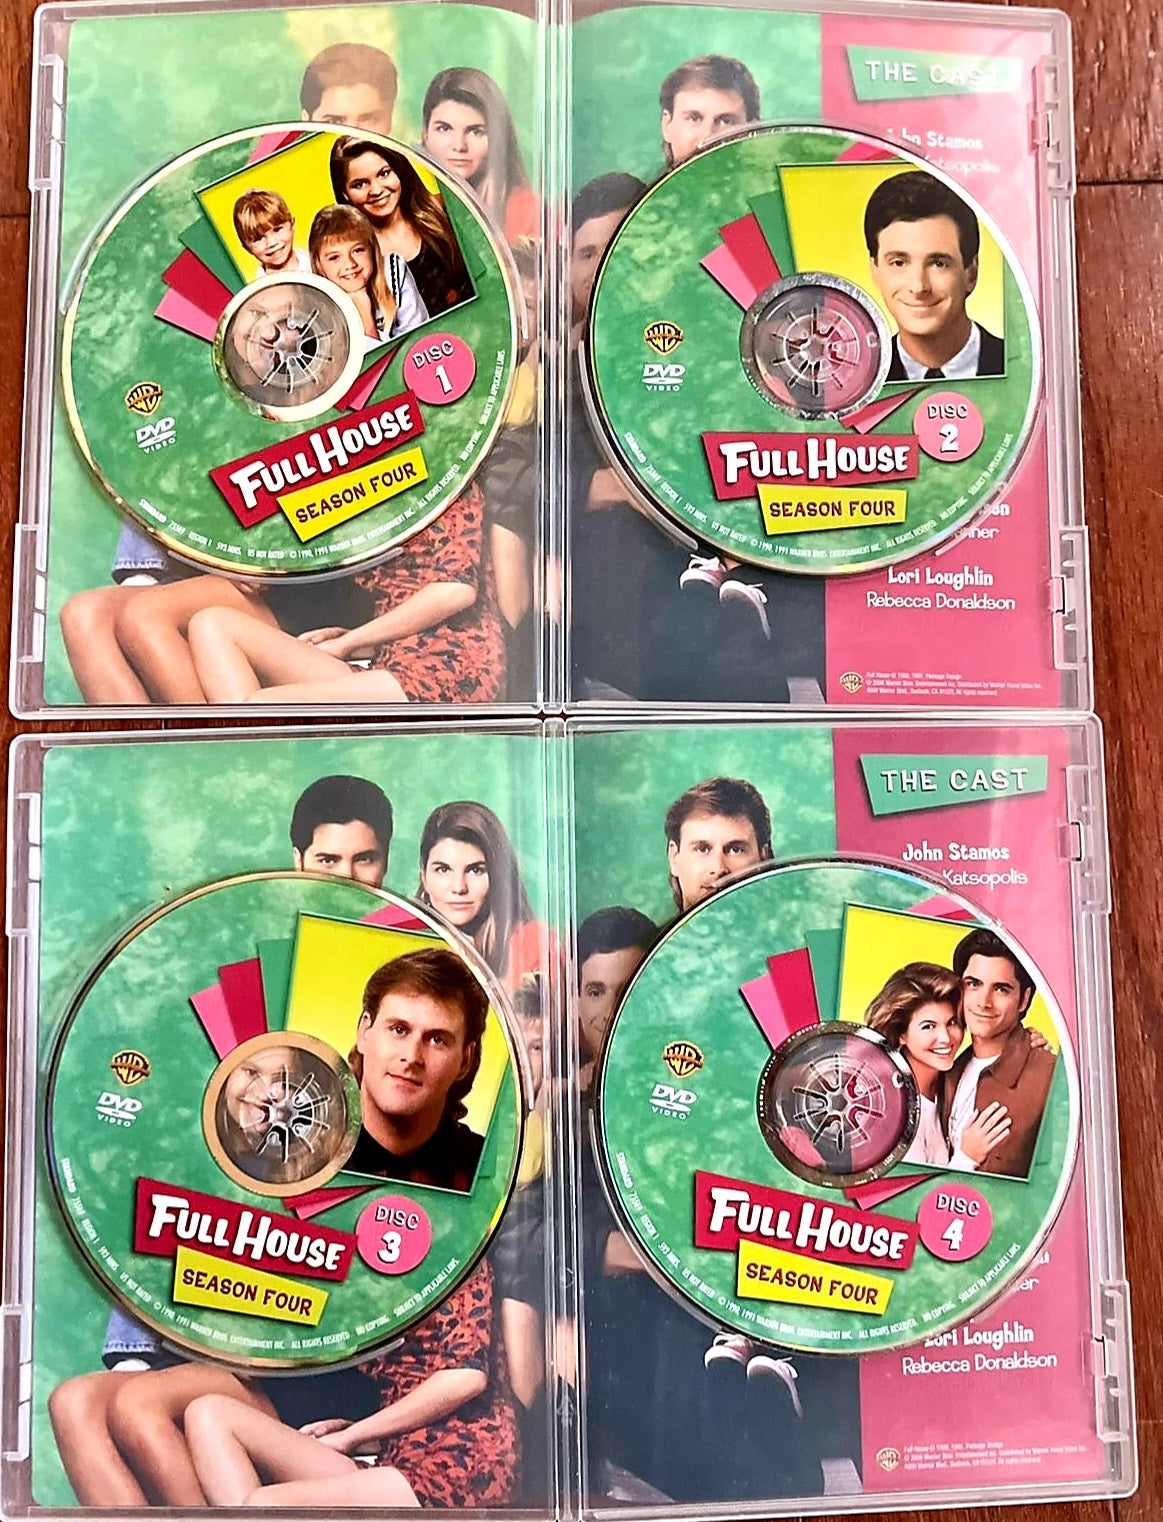 'FULL HOUSE' *The Complete Seasons 3, 4, 6 on DVD